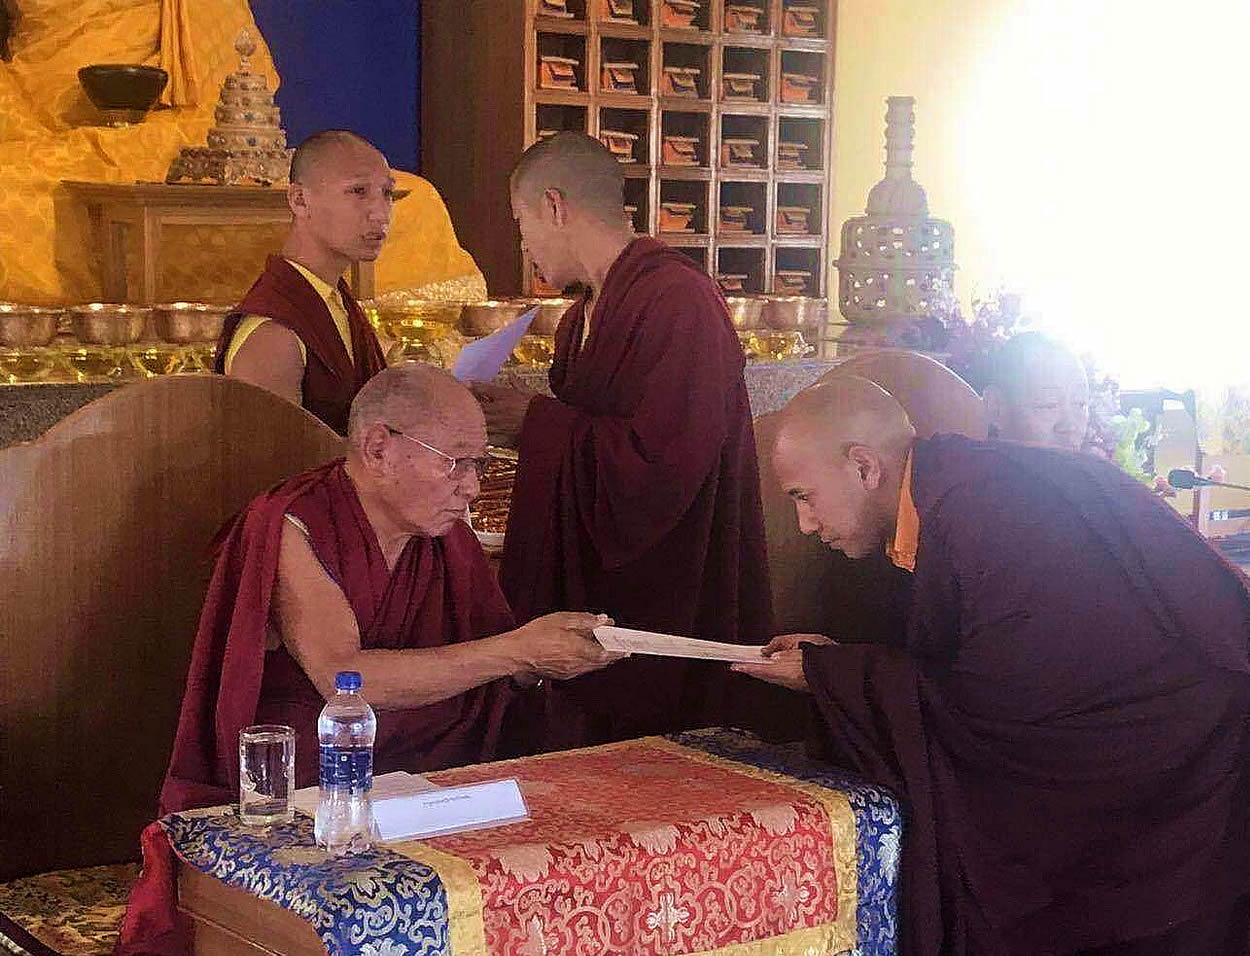 News From Mindrolling Monastery, June 2019